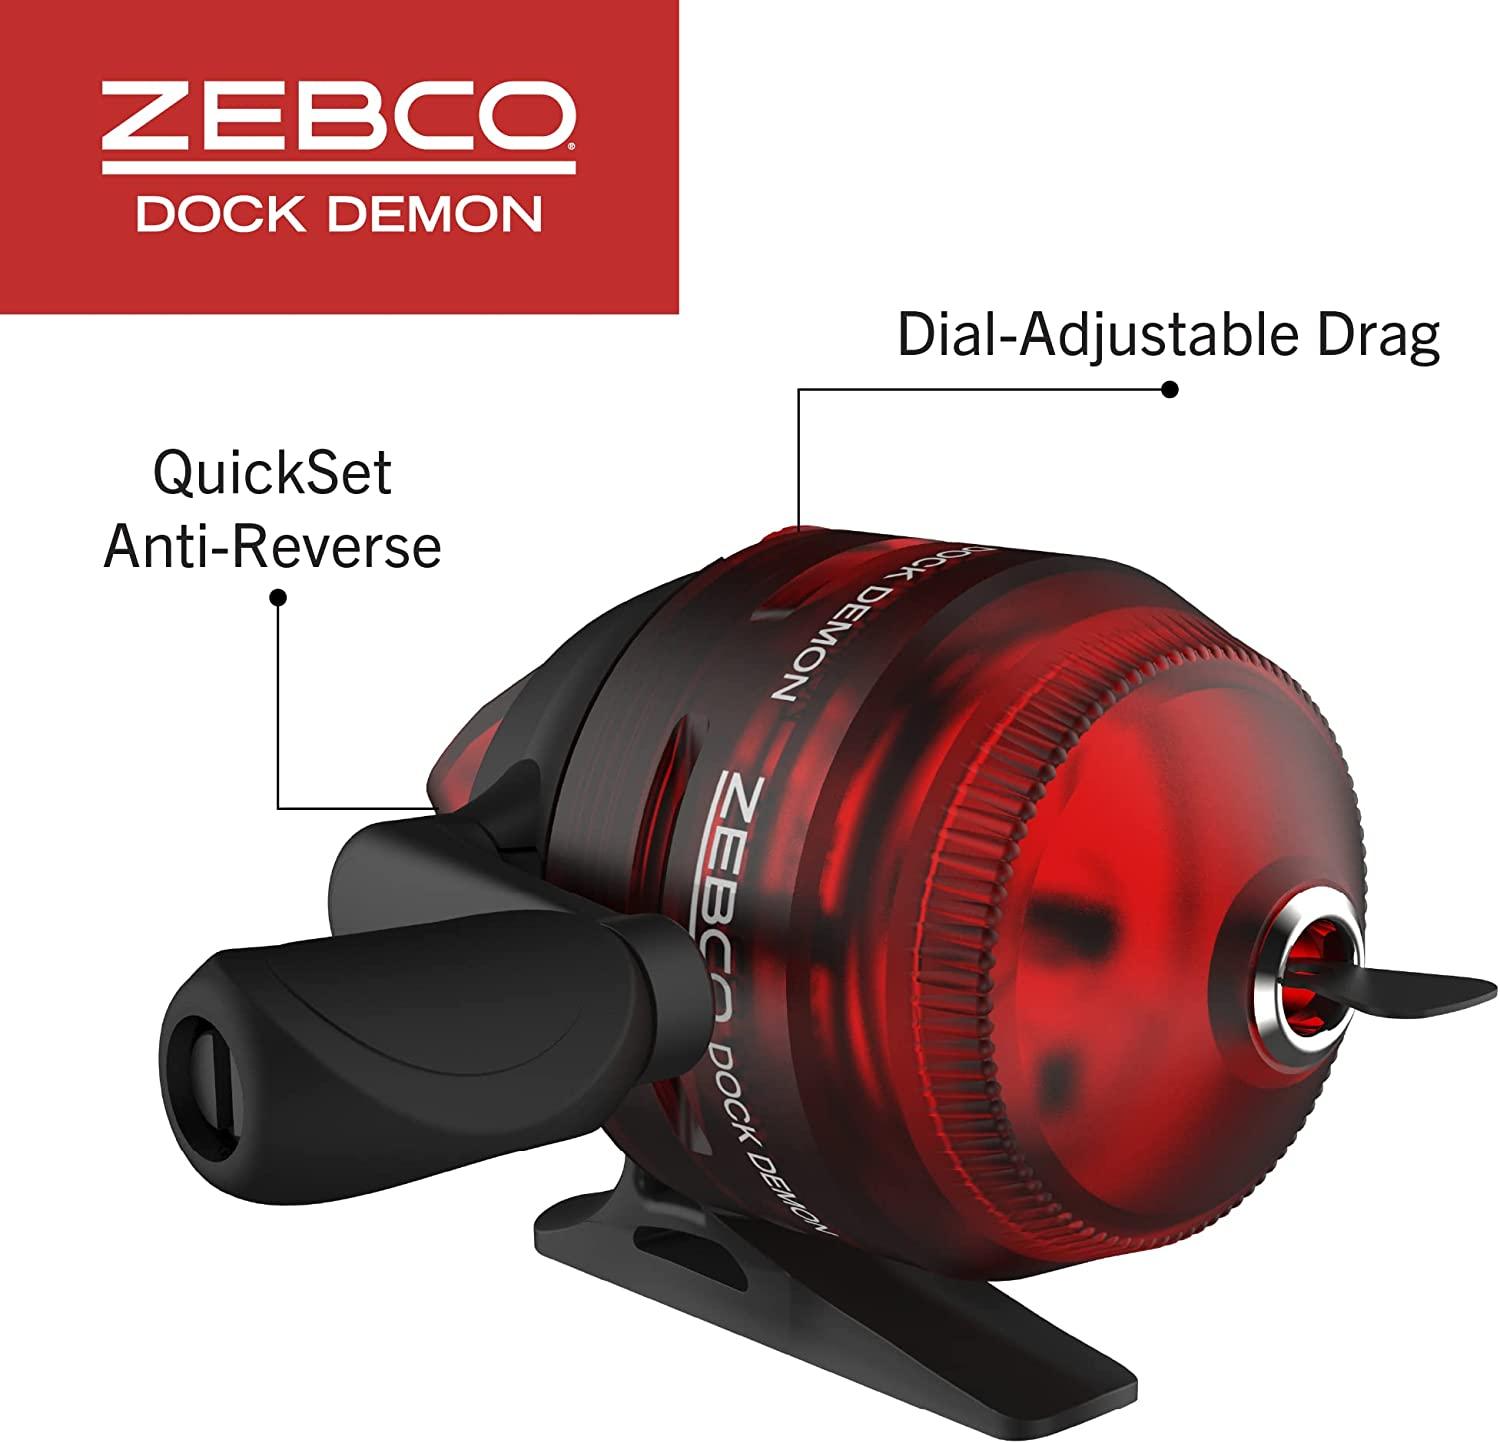 Zebco Dock Demon Deluxe Spinning Reel and Fishing Rod Combo